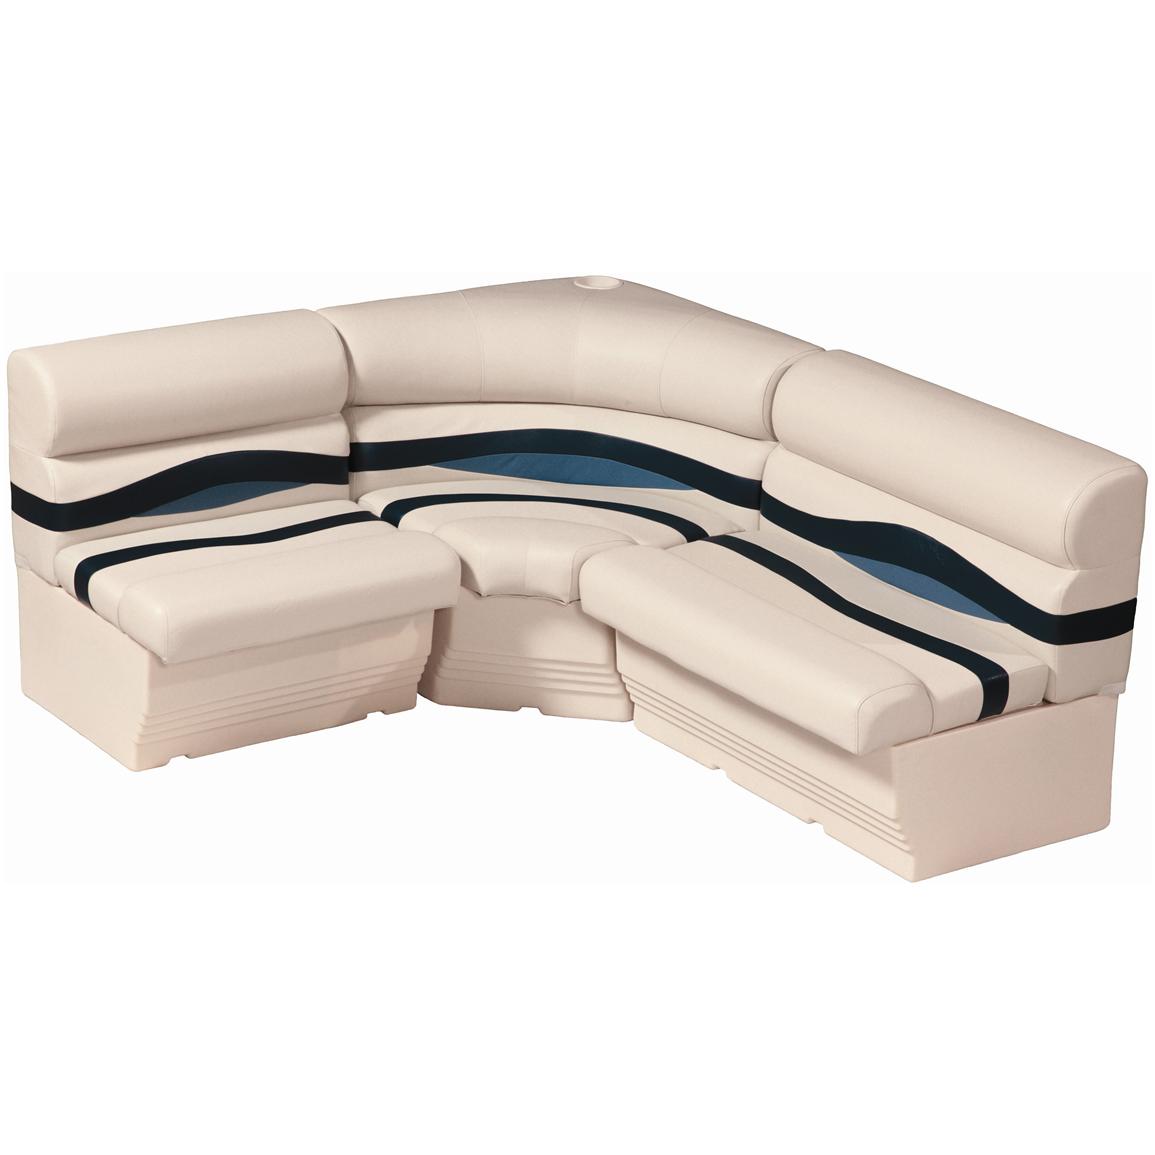 Wise Premier Pontoon Rear L Style Seating For 8 Rear Entry